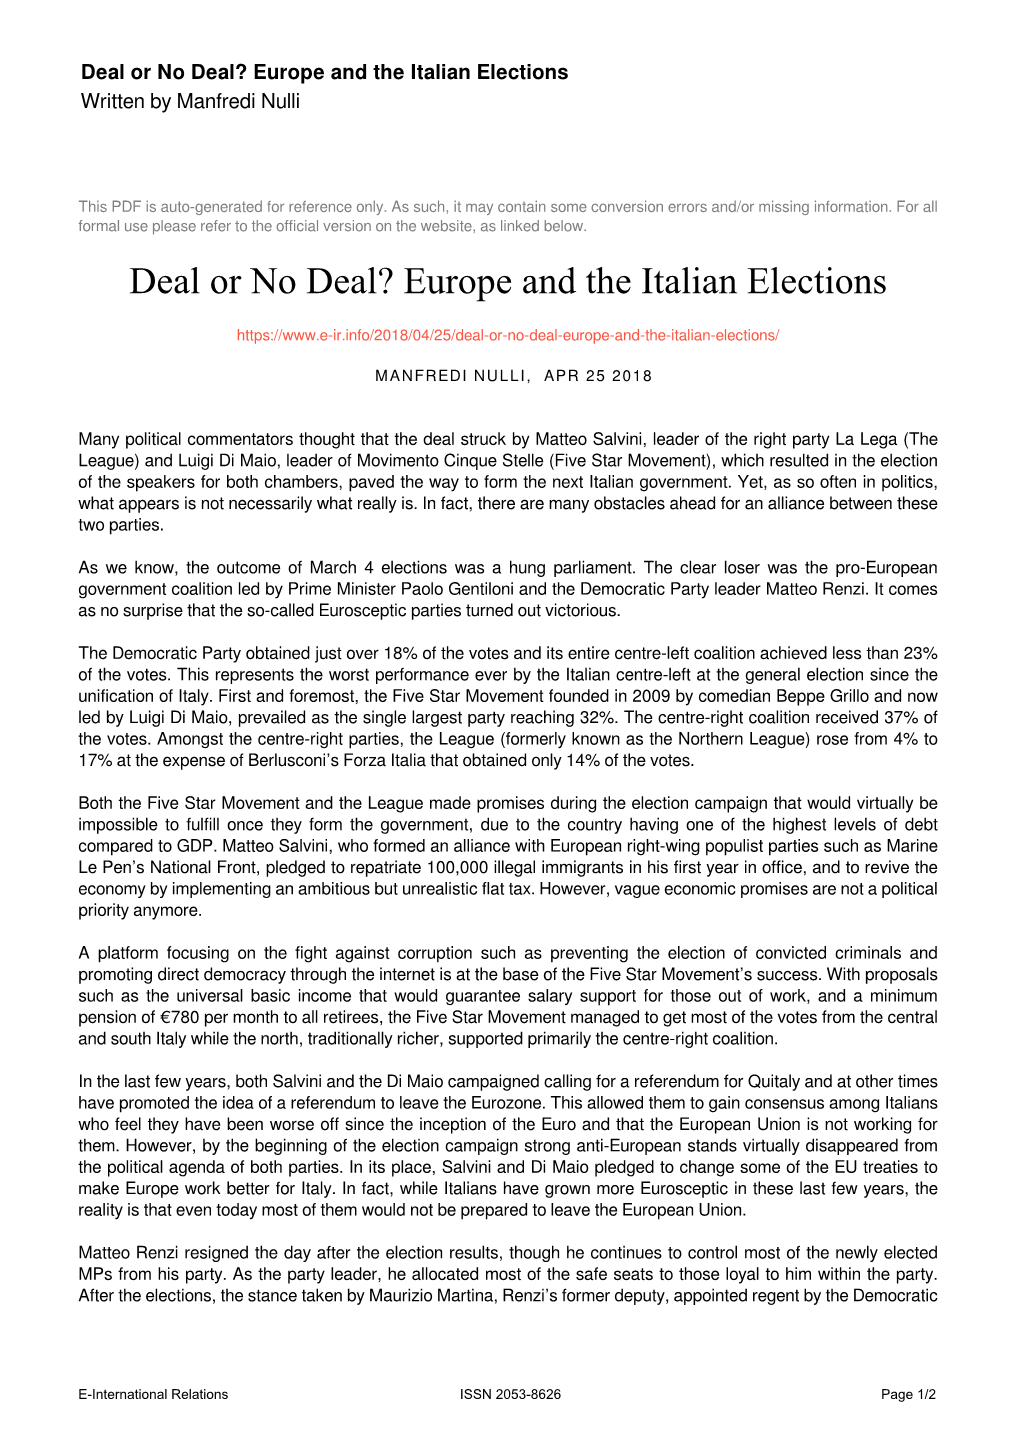 Deal Or No Deal? Europe and the Italian Elections Written by Manfredi Nulli